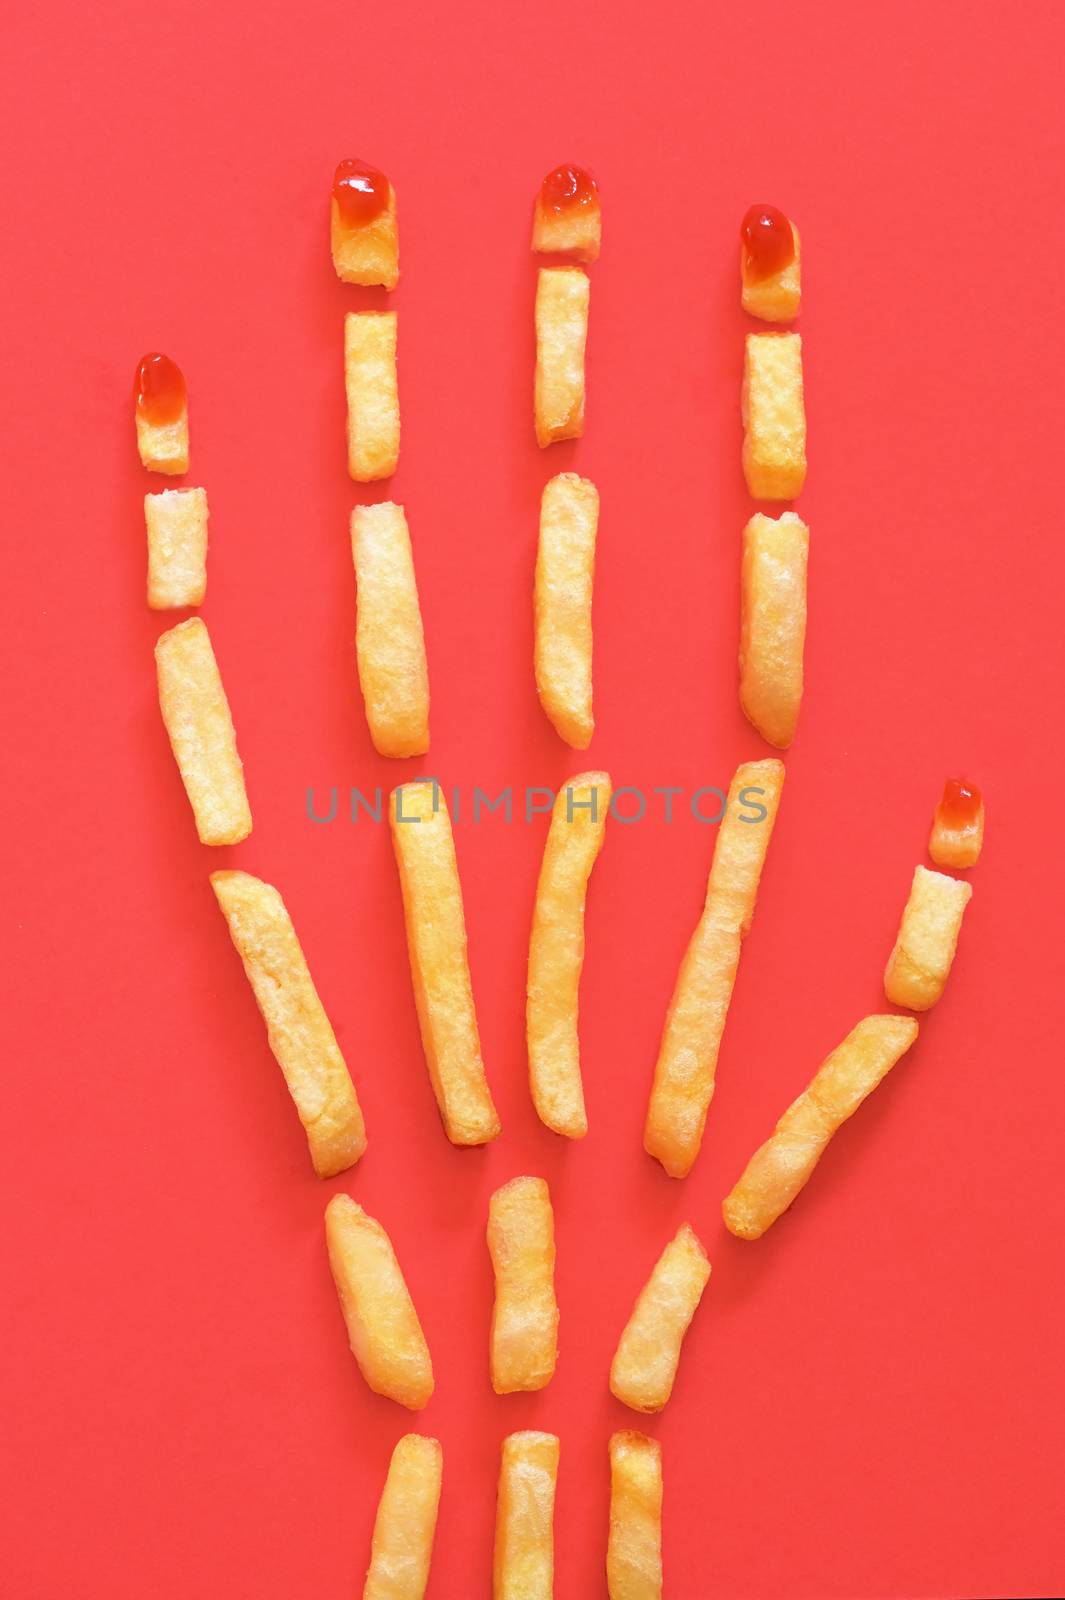 Human Hand  Concept With French Fries by mady70